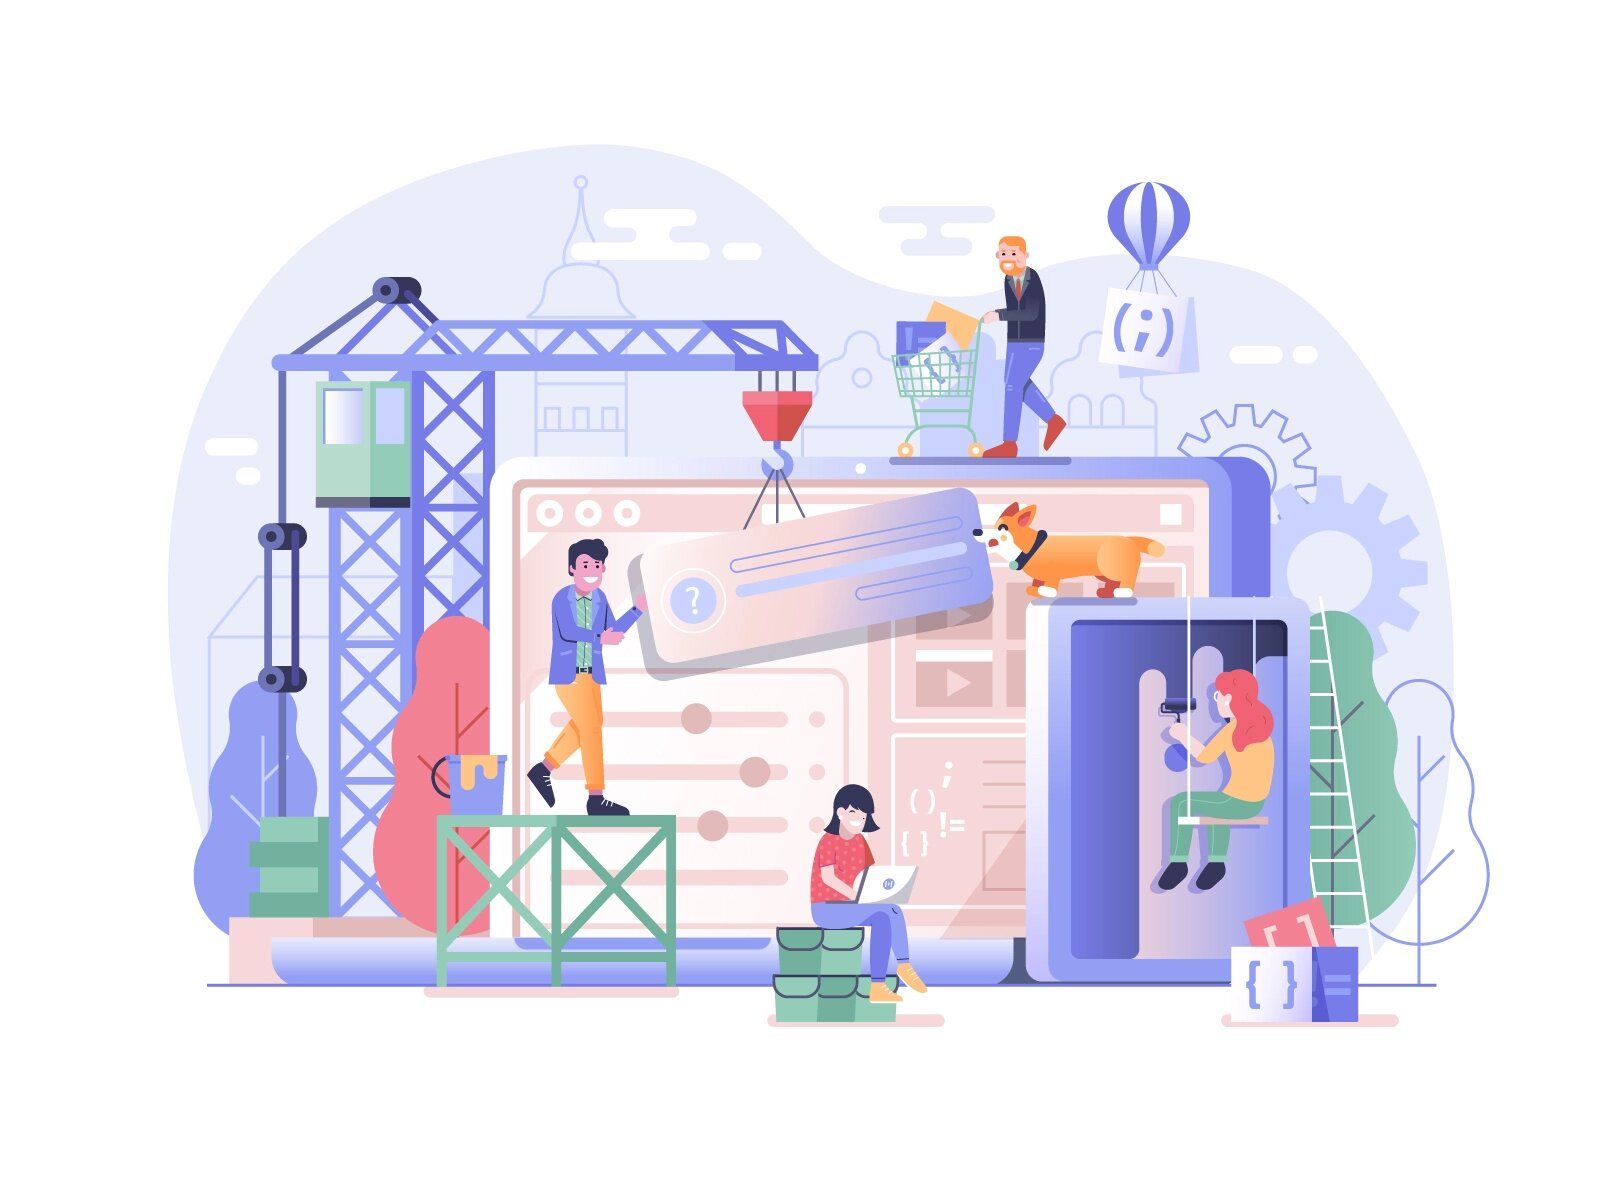 With the hybrid structure, you can build agile software development teams even with parts of specialist approach since it’s easier to combine values (*image by [Alex Krugli](https://dribbble.com/krugli){ rel="nofollow" target="_blank" .default-md}*)